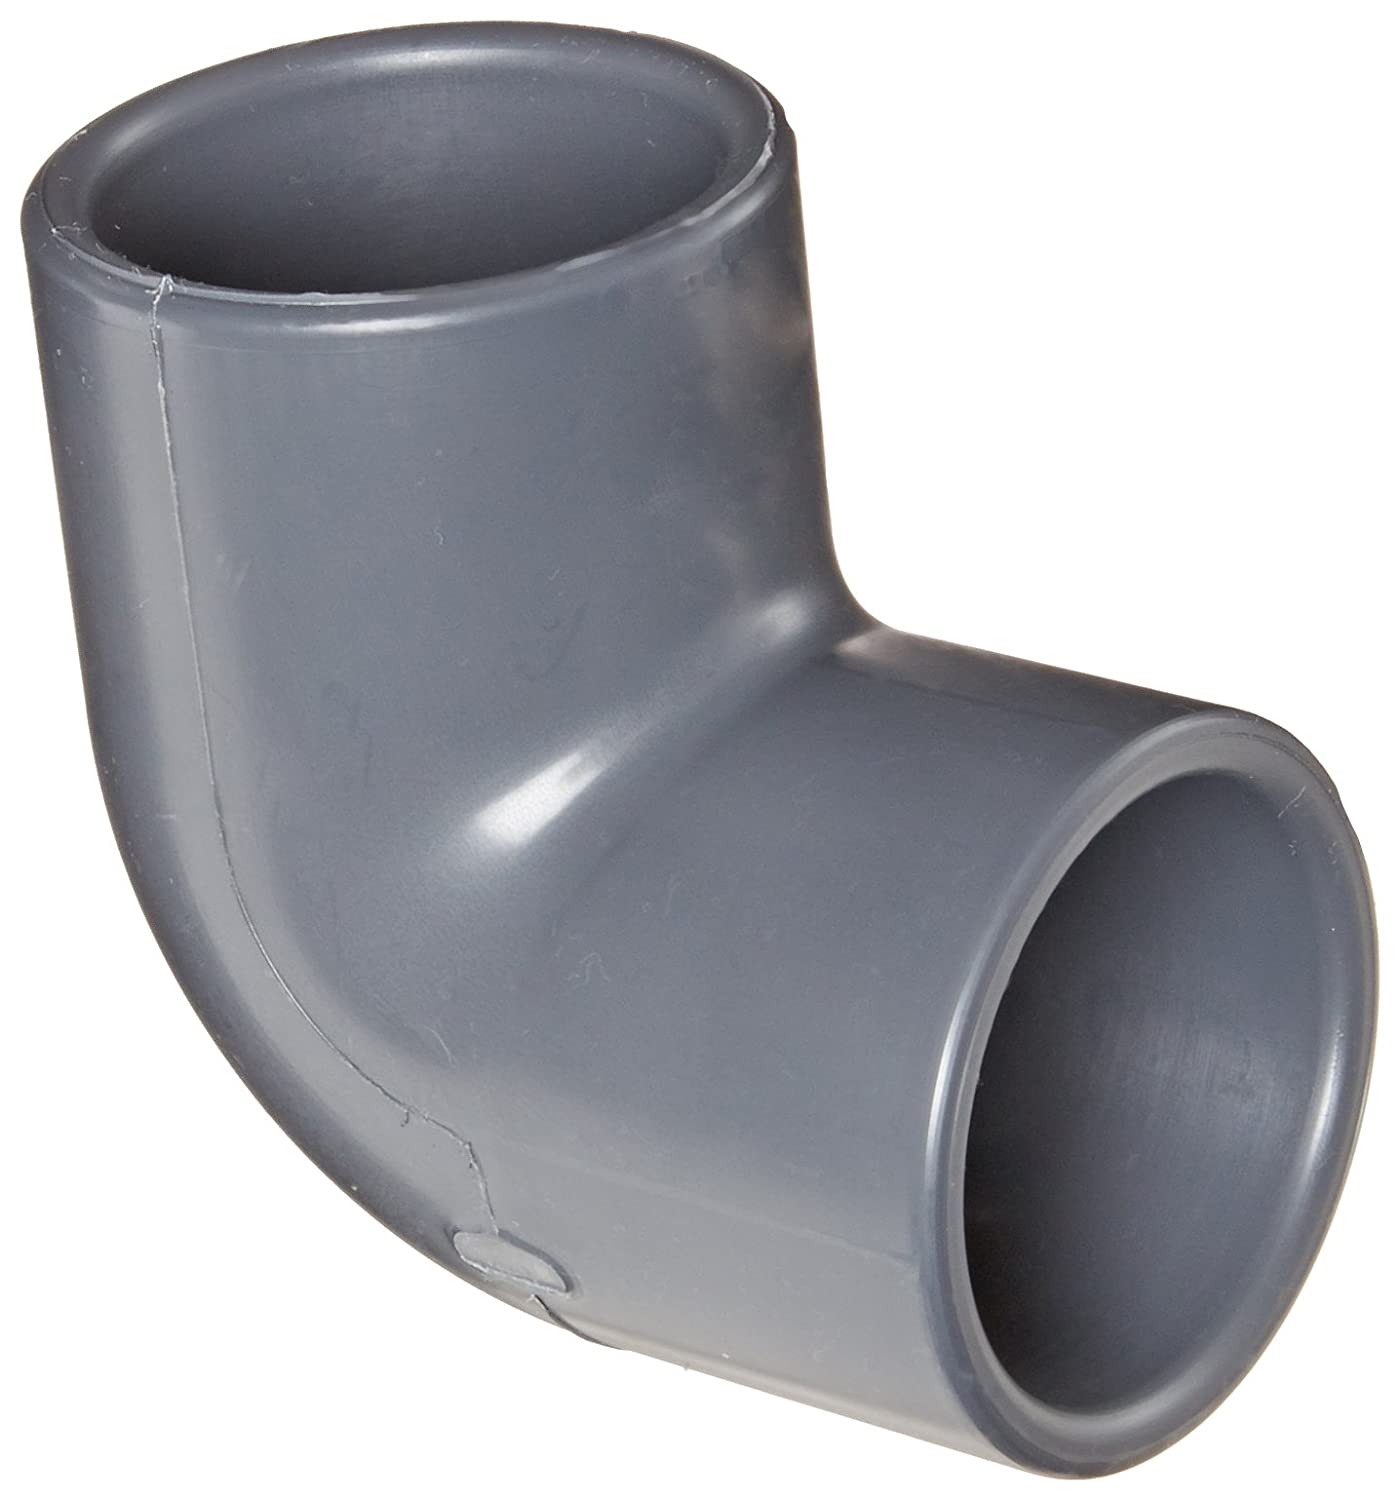 806-015 - PVC Pipe Fitting, 90 Degree Elbow, Schedule 80, 1-1/2" Socket